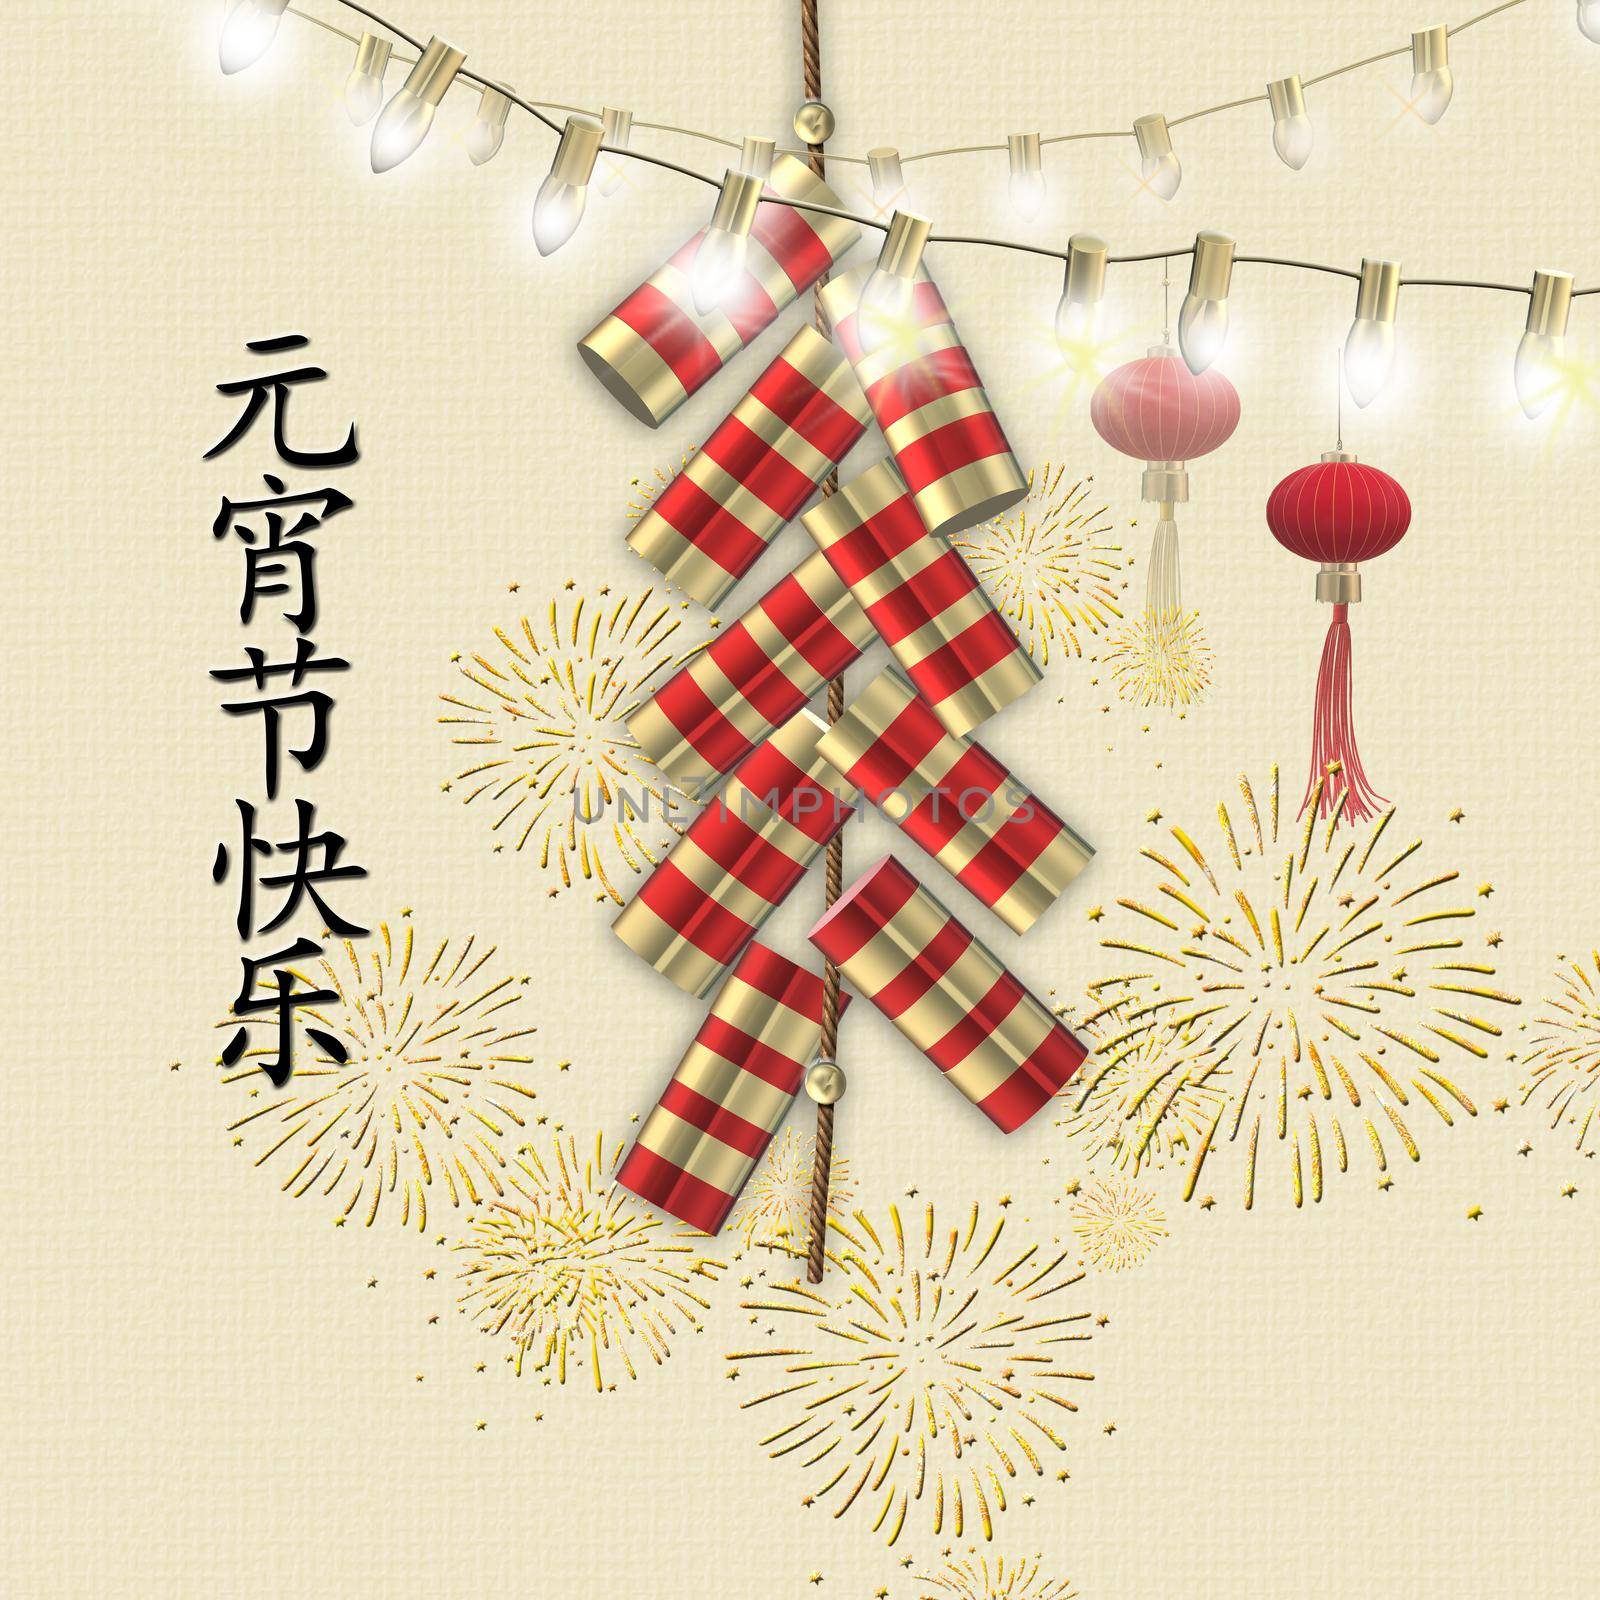 Fire Cracker of Chinese New Year, Oriental Chinese New Year firecrackers, lanterns, fireworks, string of lights on pastel yellow background. Place for text, Text Happy Chinese new year. 3D rendering